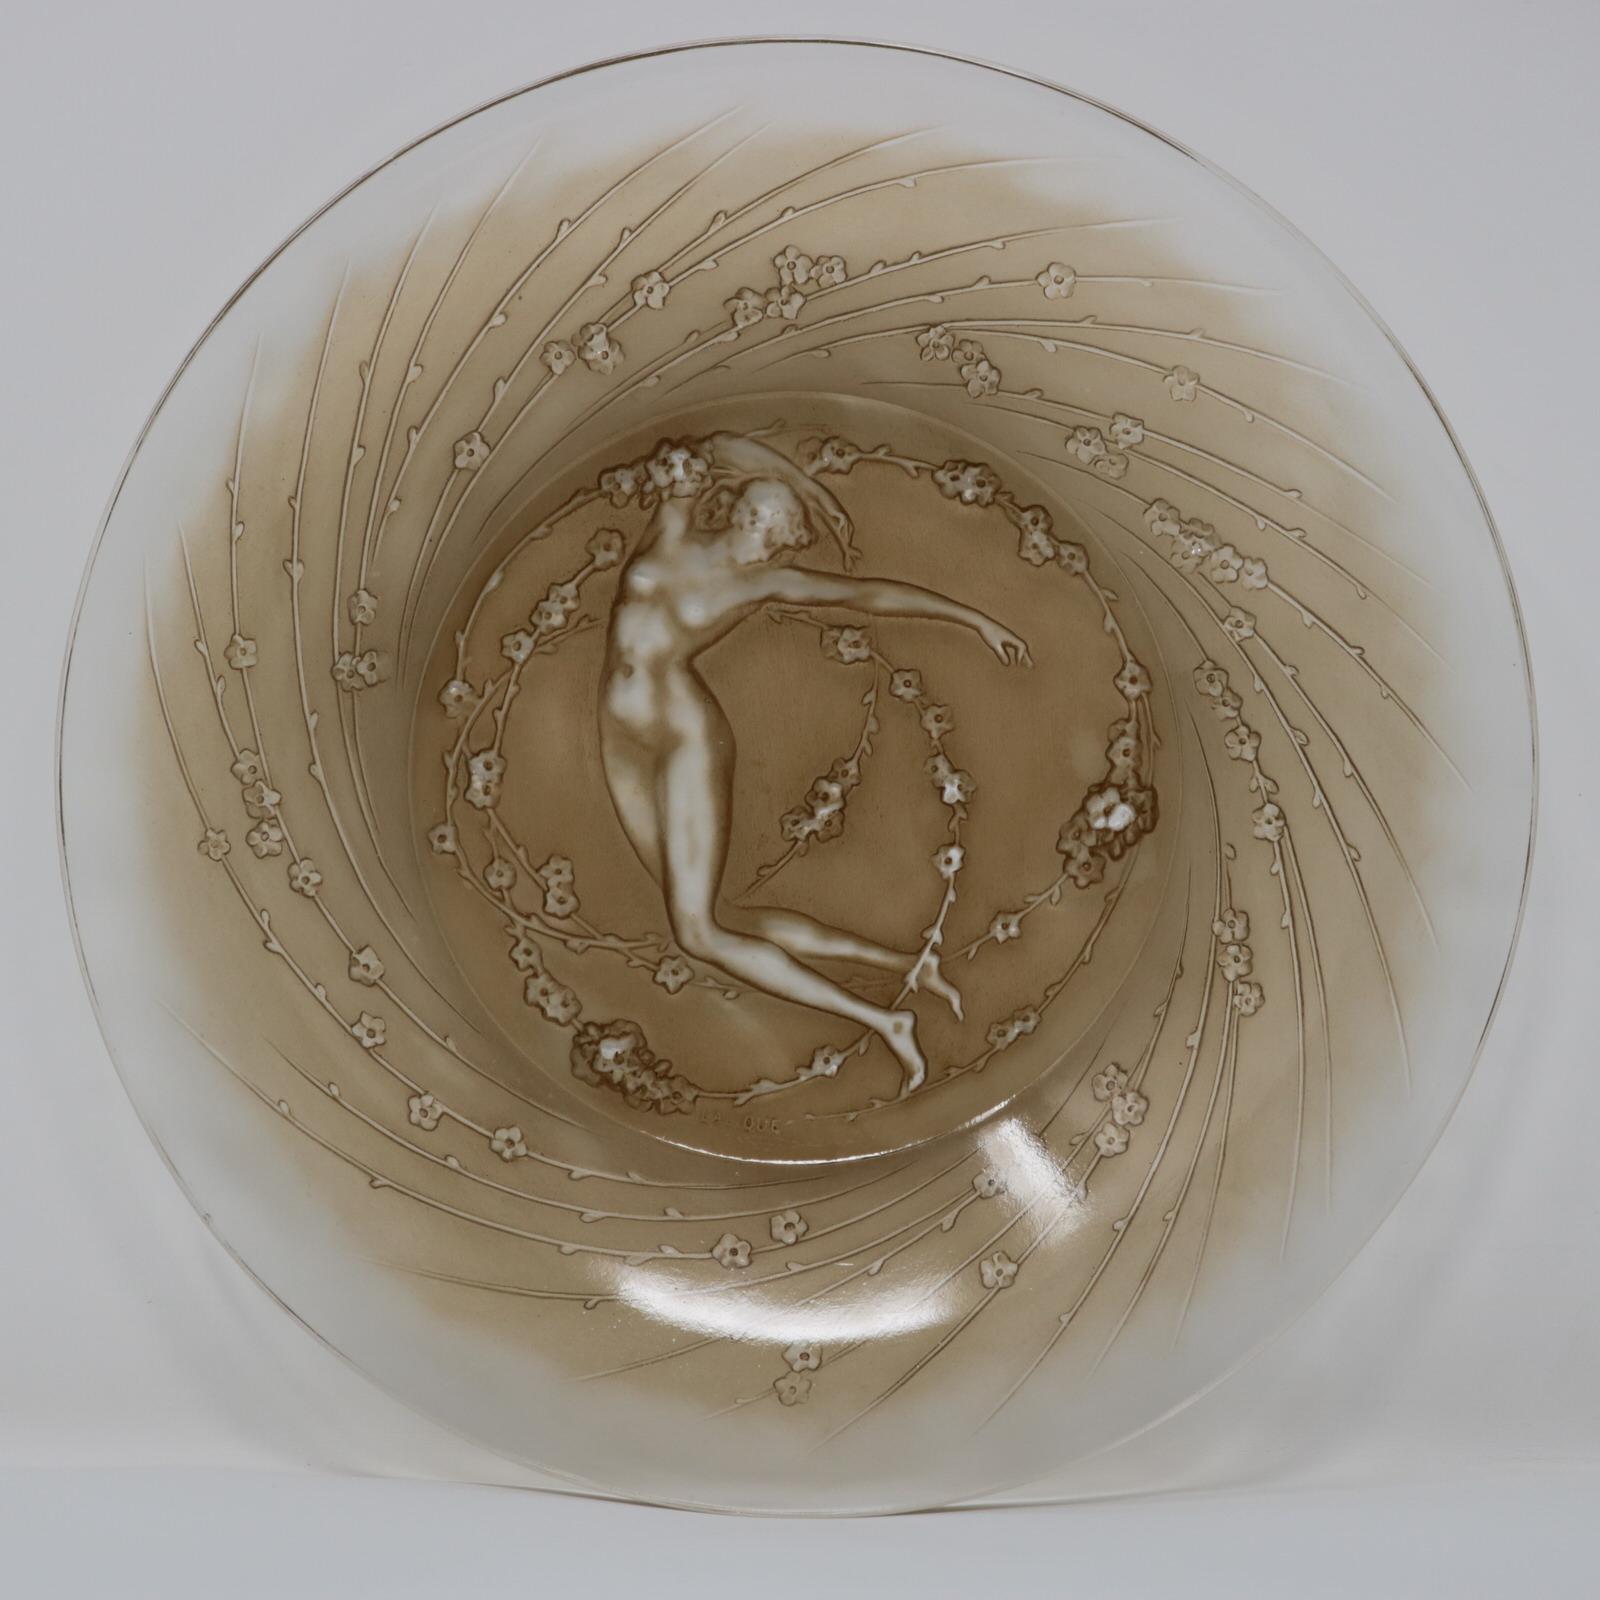 Rene Lalique clear and frosted glass, 'Une Figurine et Fleurs' plate. Sepia stained details. This pattern features a naked female figure, surrounded by flowers. Moulded makers mark, 'LALIQUE'. Book reference: Marcilhac 3002.